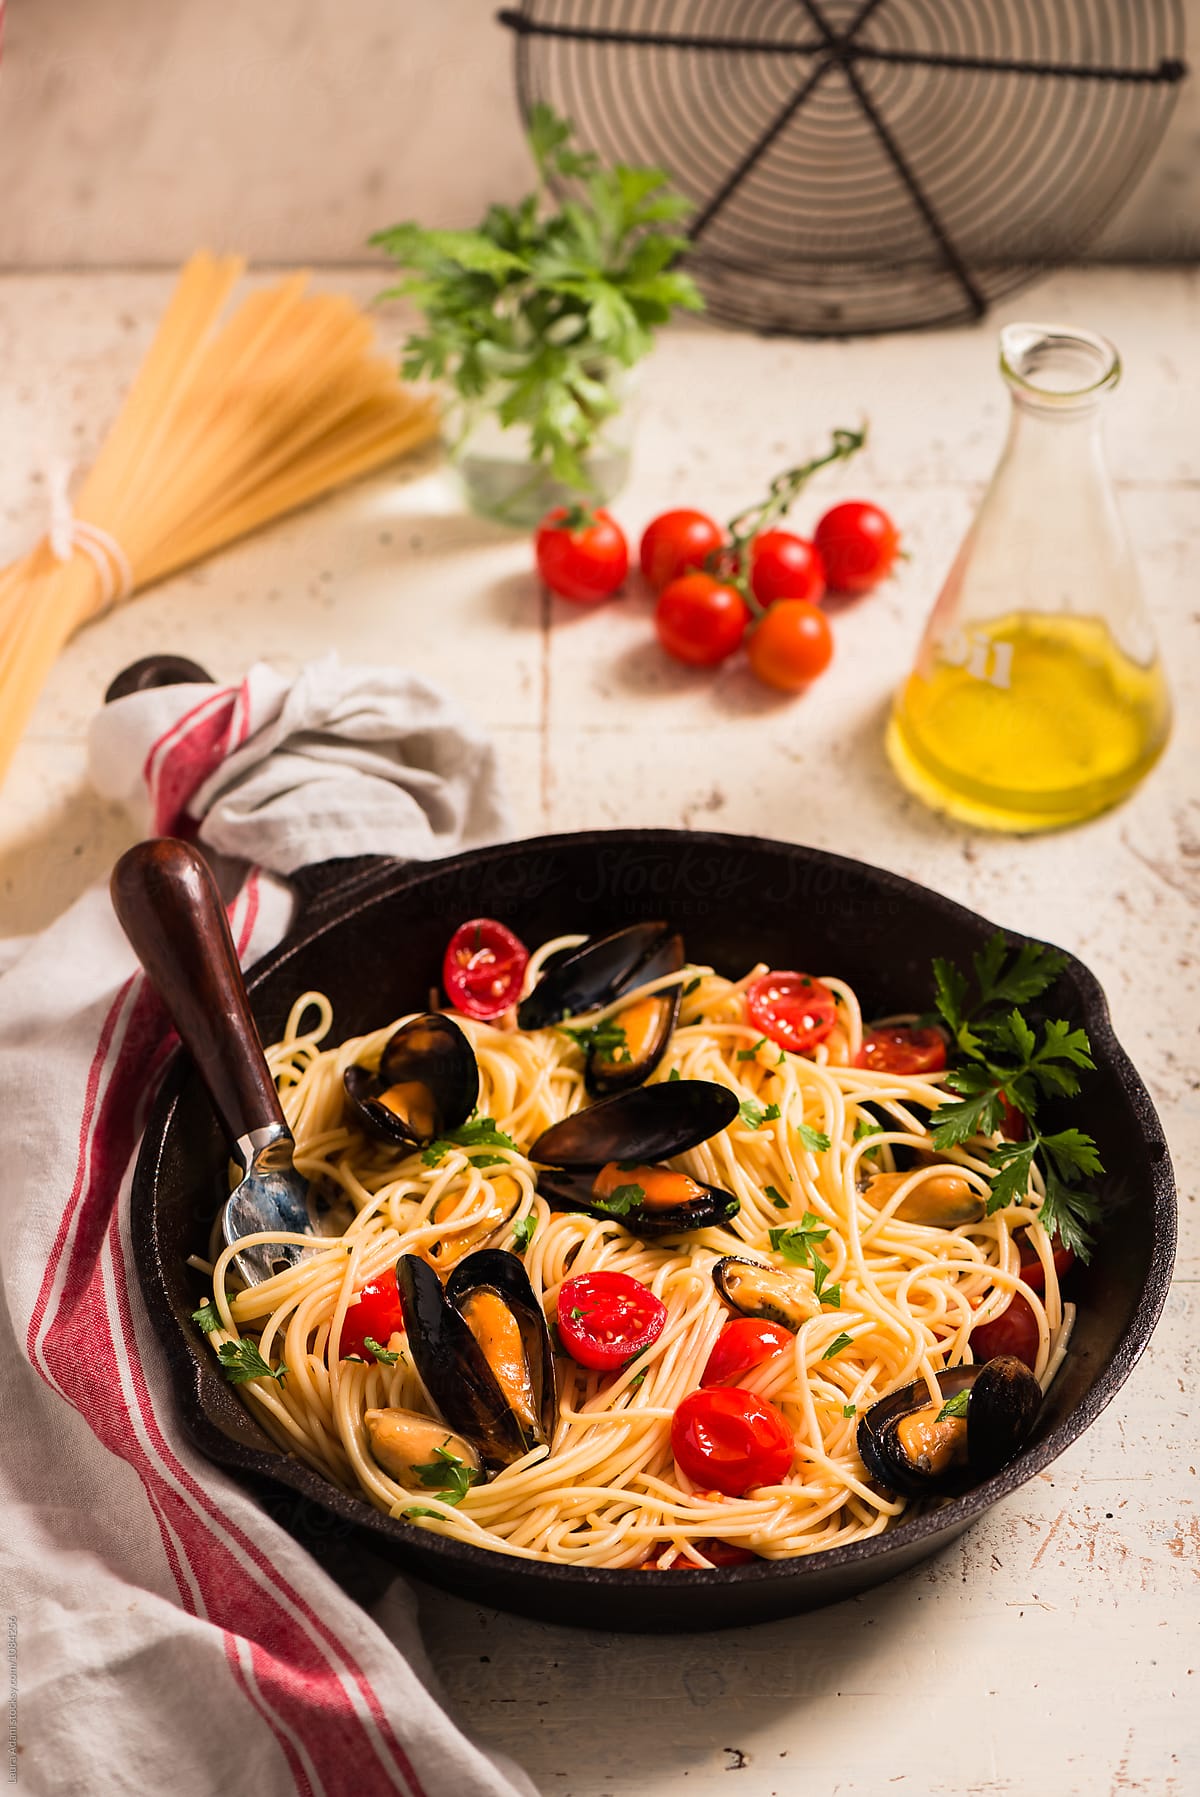 Spaghetti with mussels and cherry tomatoes